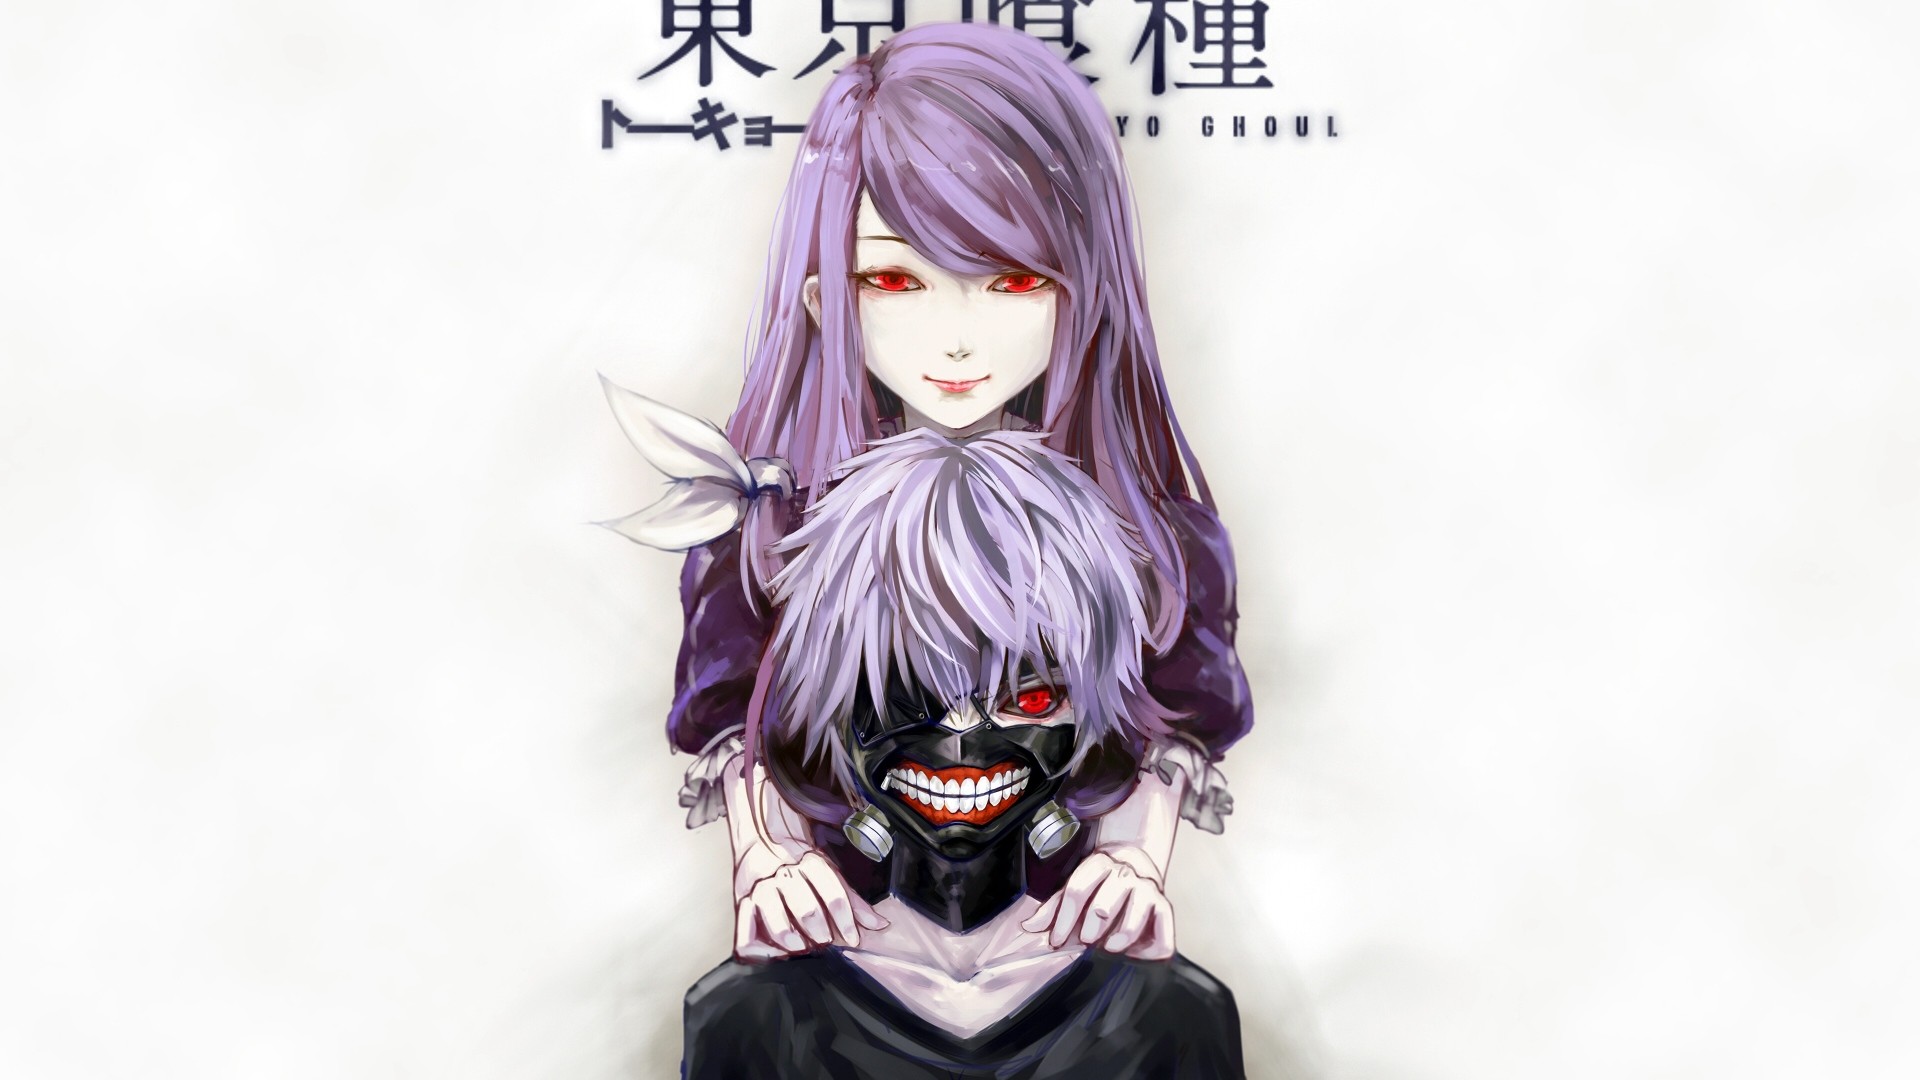 1920x1080 Anime Wallpapers Tokyo Ghoul HD 4K Download For Mobile iPhone & PC